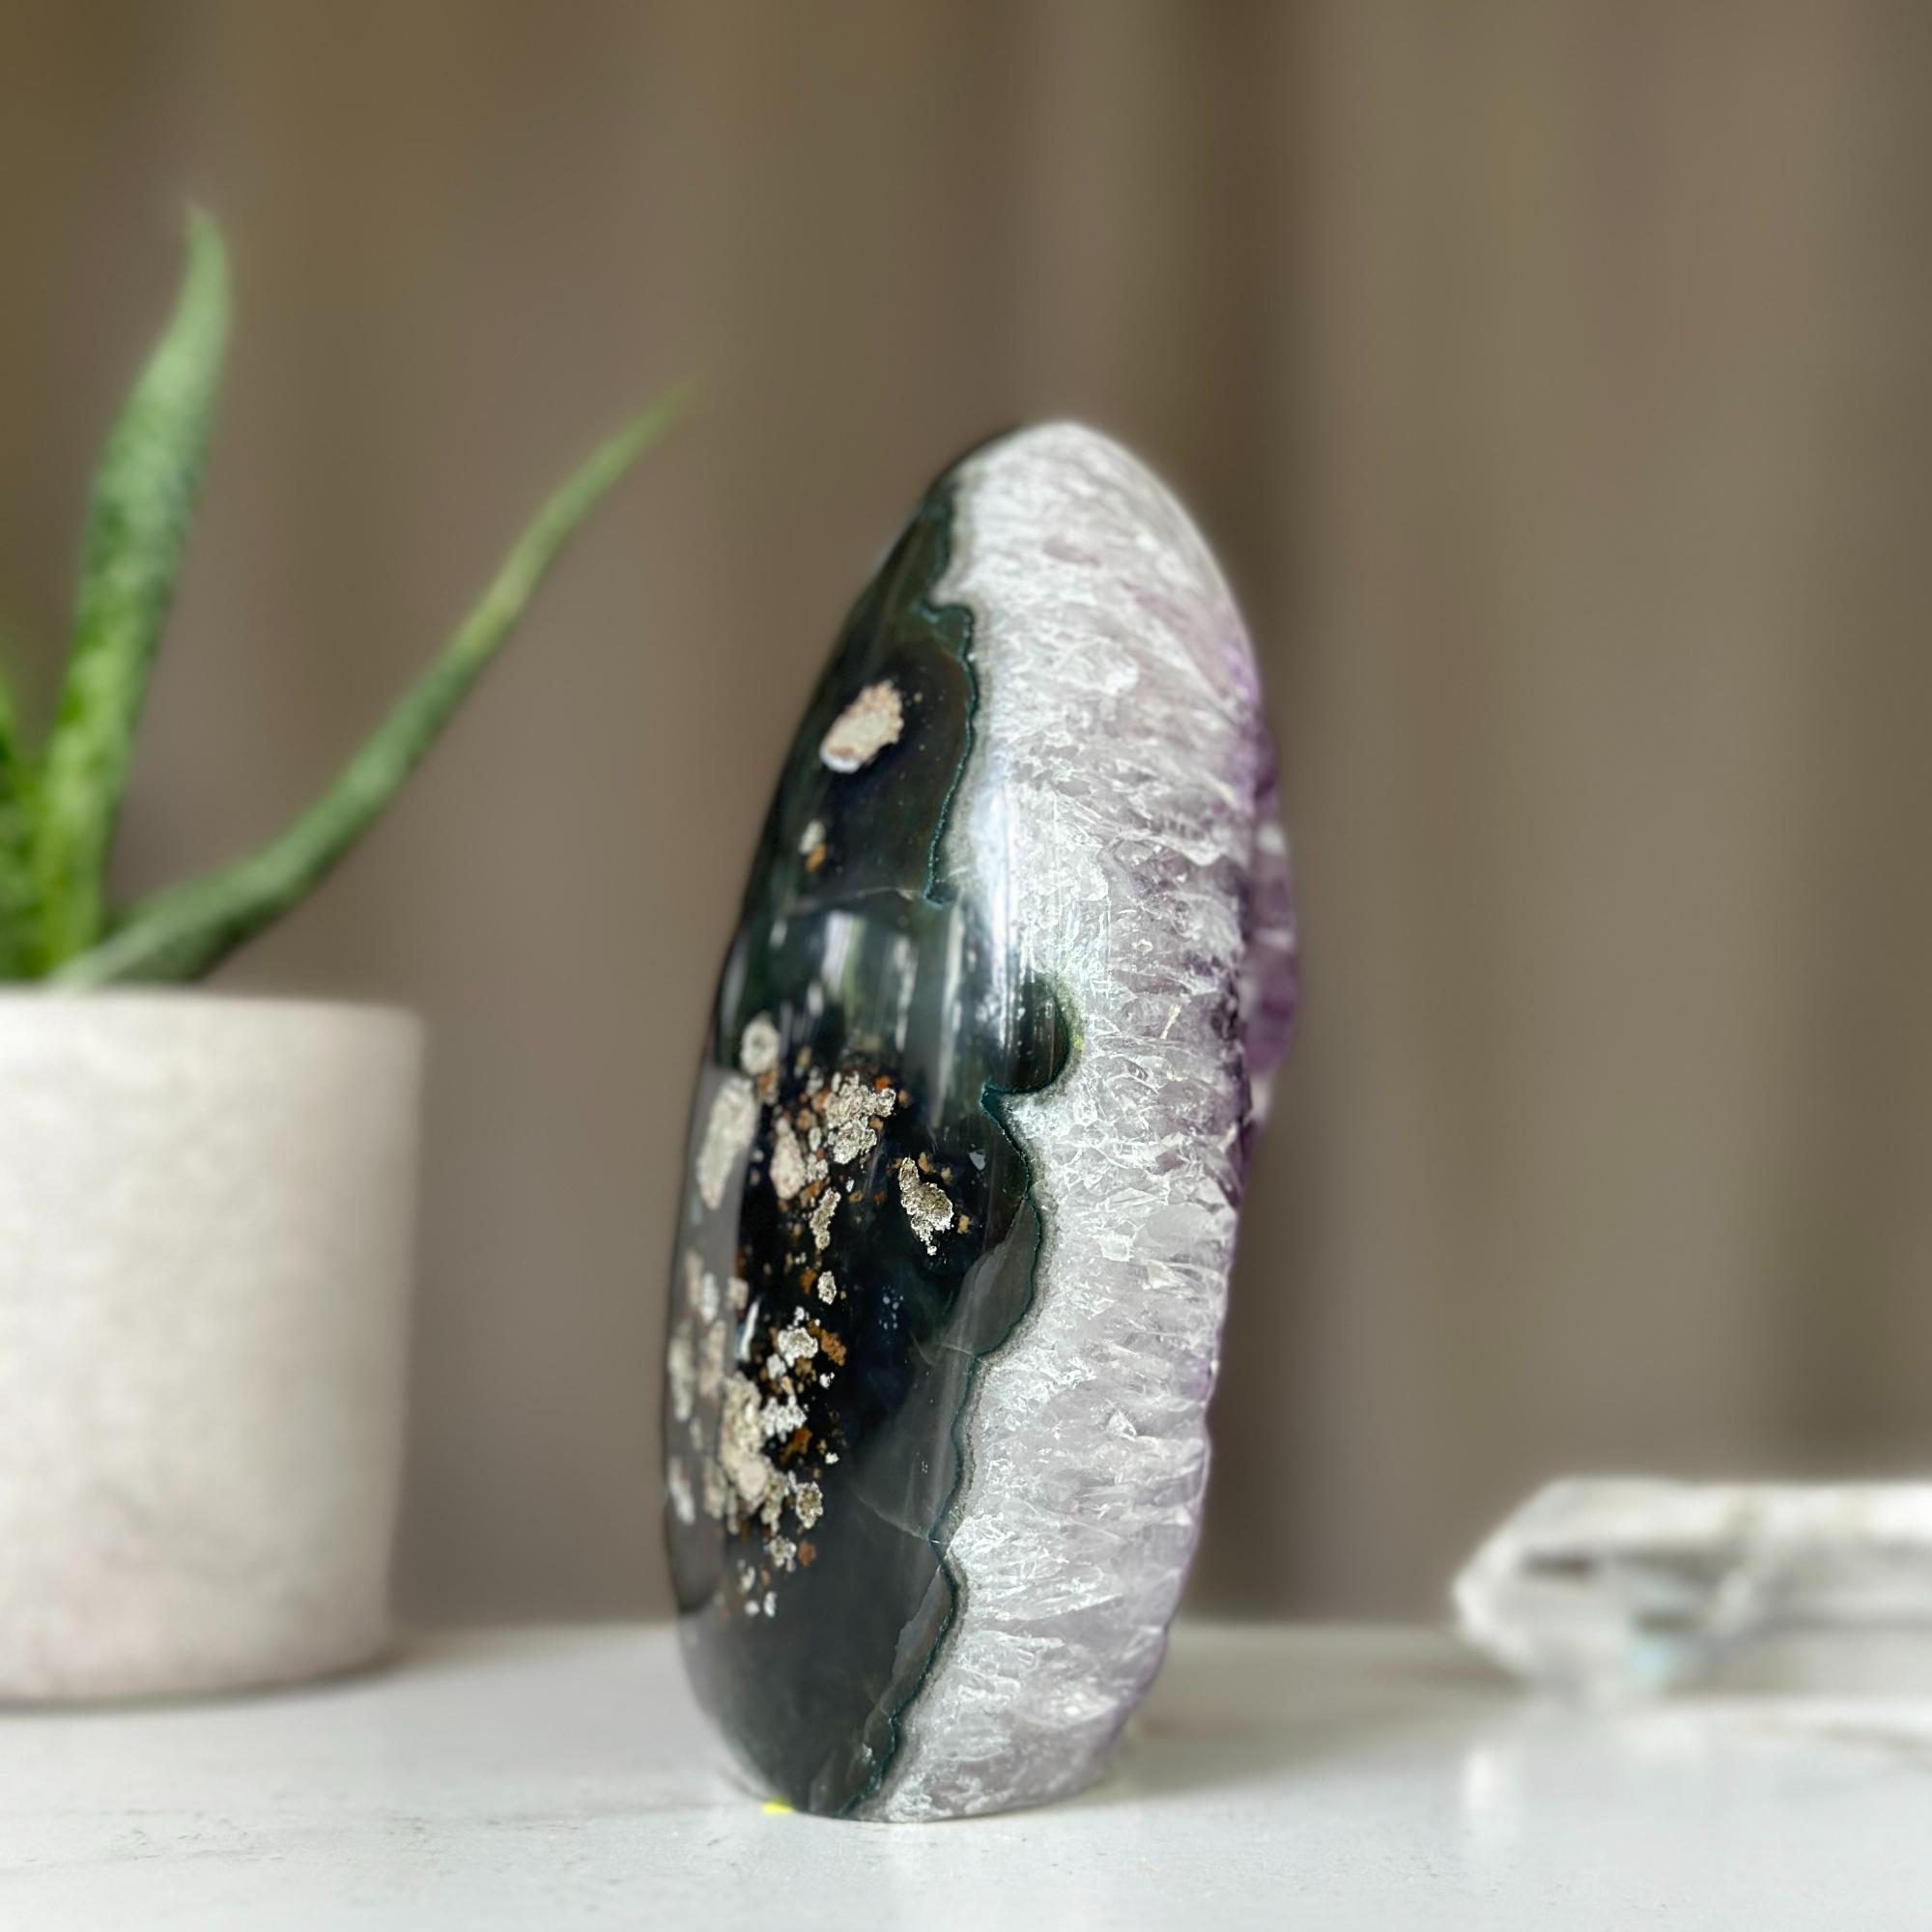 Amethyst Geode Crystal Egg with incredible Agate formations, Natural cave shaped polished agate stone